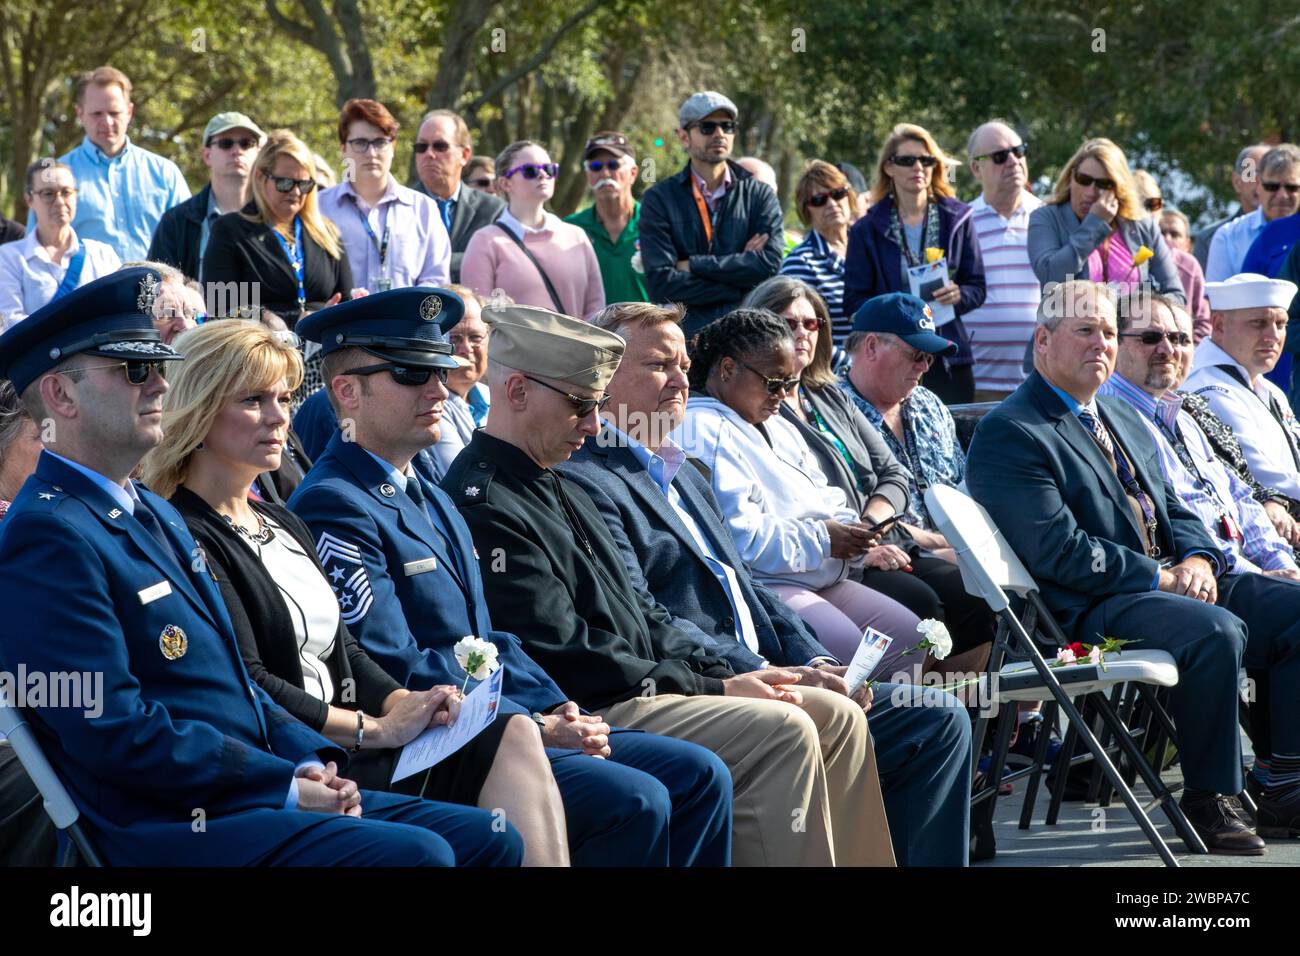 The audience looks on during the NASA Day of Remembrance ceremony at the Space Mirror Memorial in the Kennedy Space Center Visitor Complex on Jan. 30, 2020. The crews of Apollo 1 and space shuttles Challenger and Columbia, as well as other fallen astronauts who lost their lives in the name of space exploration and discovery, were honored at the annual event. Stock Photo